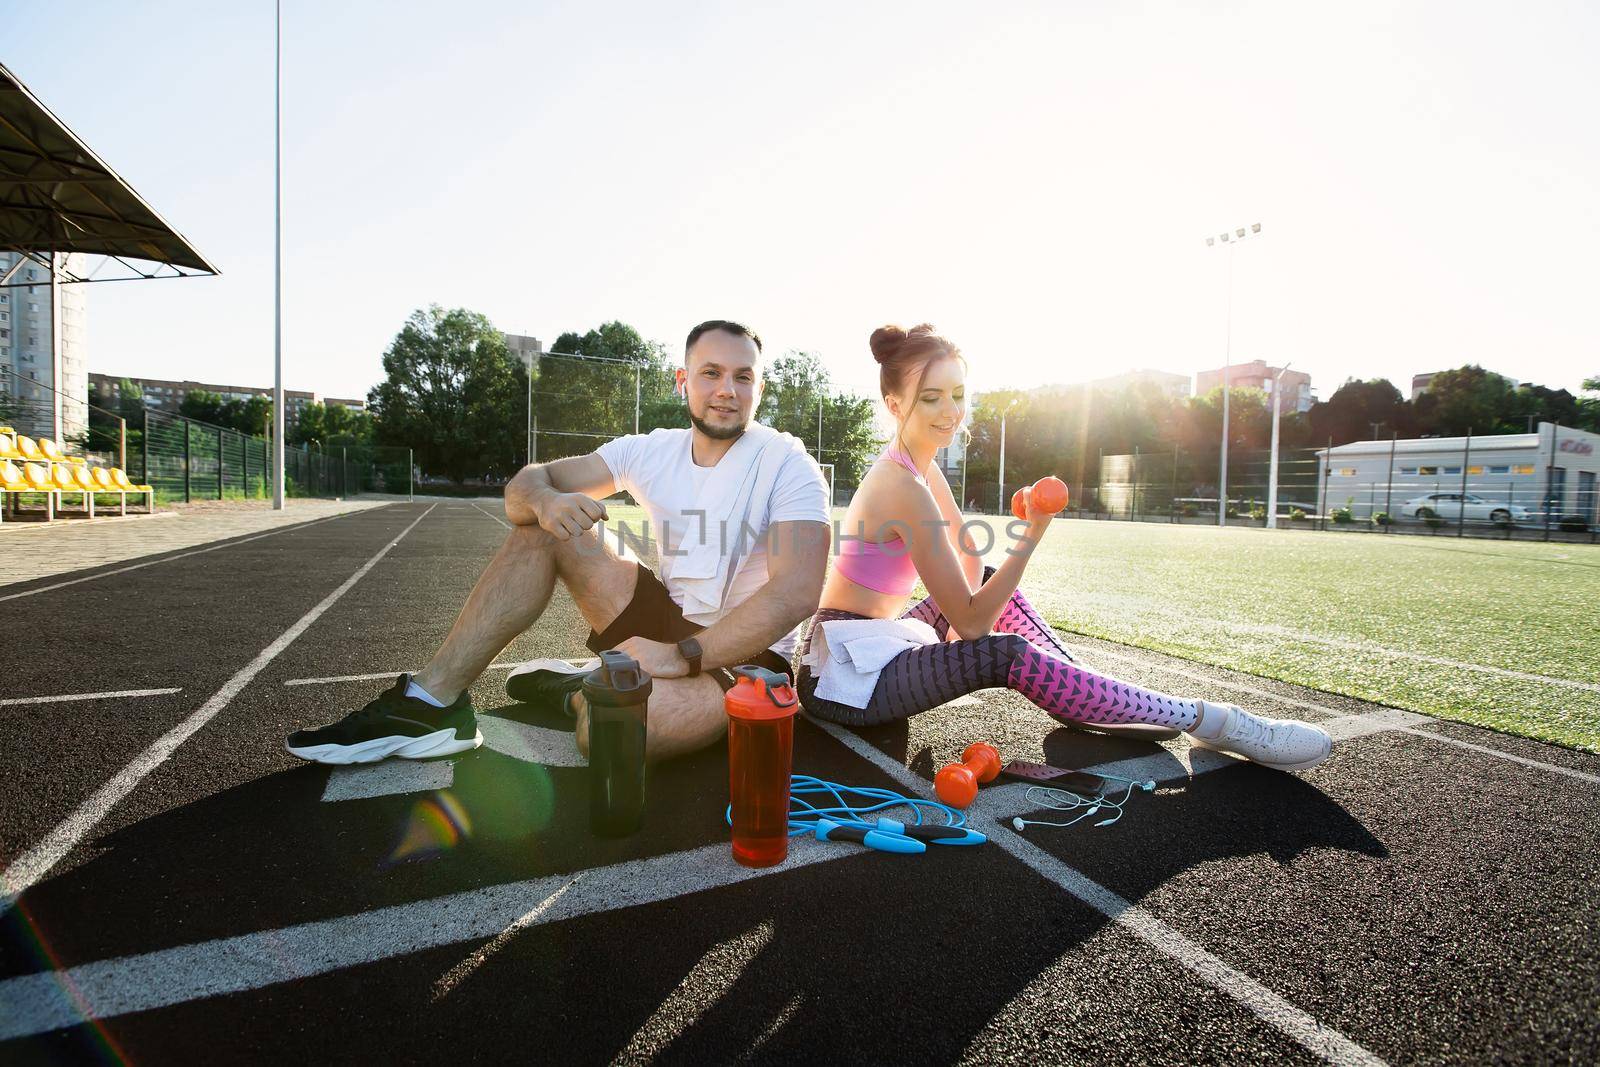 Man and a woman sit in the stadium and laugh. Outdoor sports activities